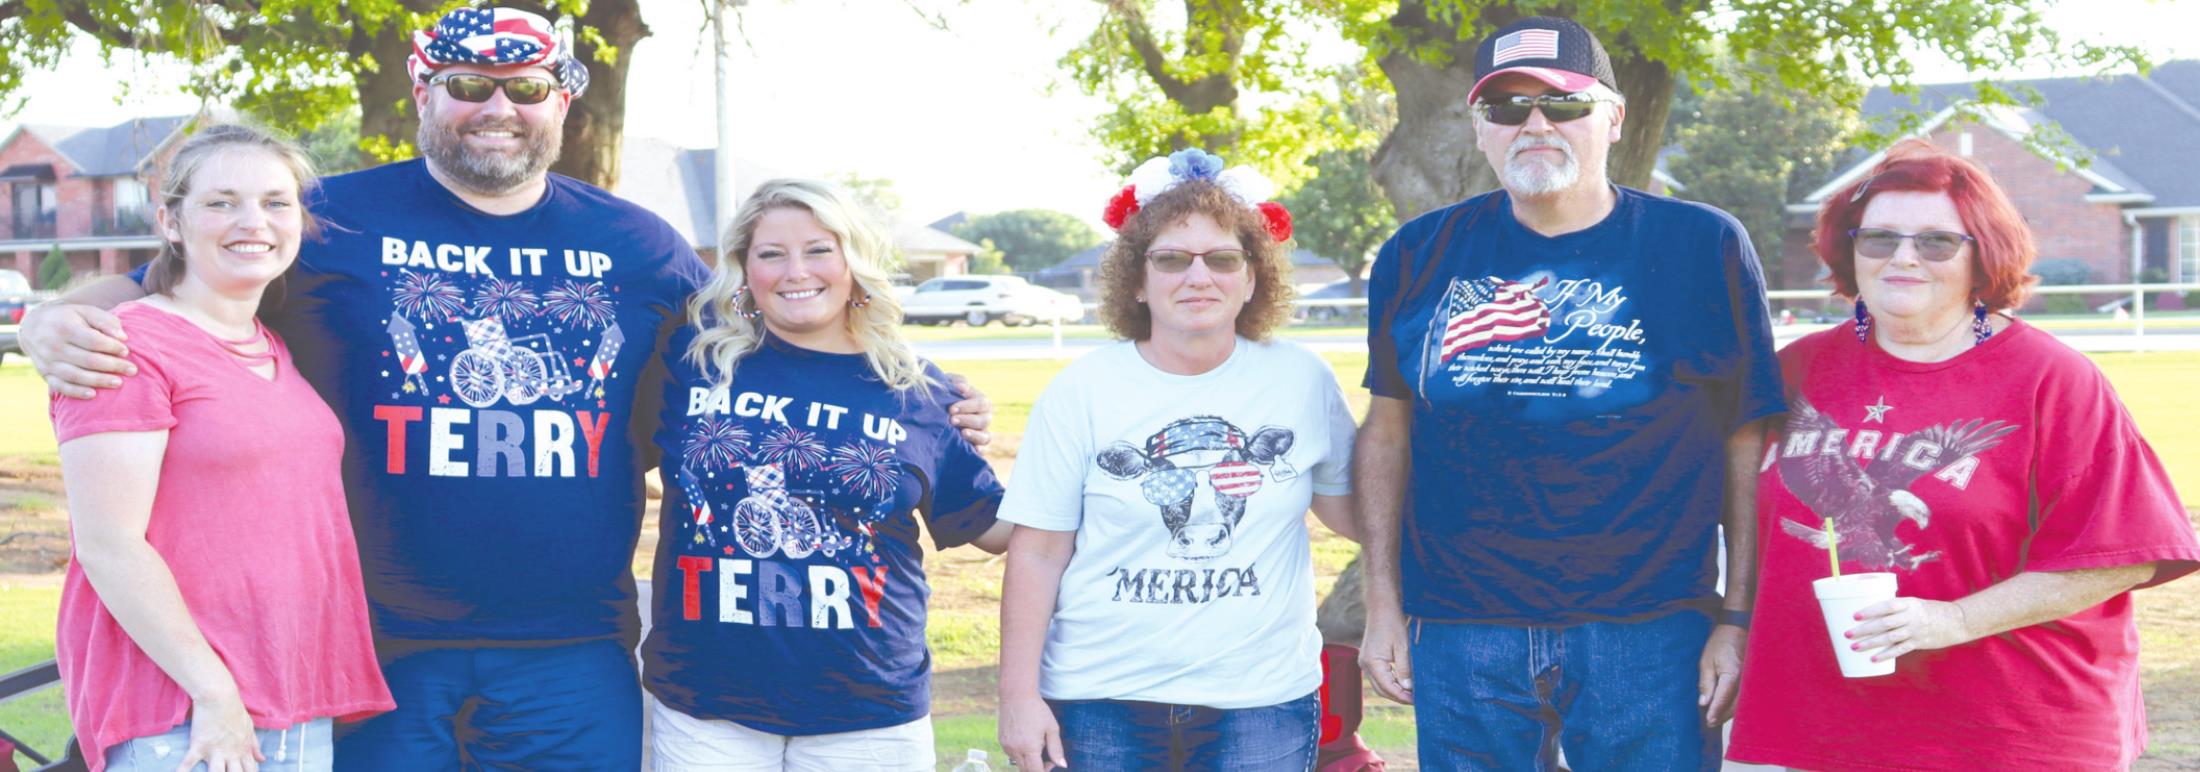 Participants in last year’s Fourth of July activities at Rader Park wore red, white and blue to celebrate. From left is Alex Bull, Ben Cury, Alicia Cury, Alice Evans, Custer County Under Sheriff Kevin Evans and Kim Chenoweth. File photo